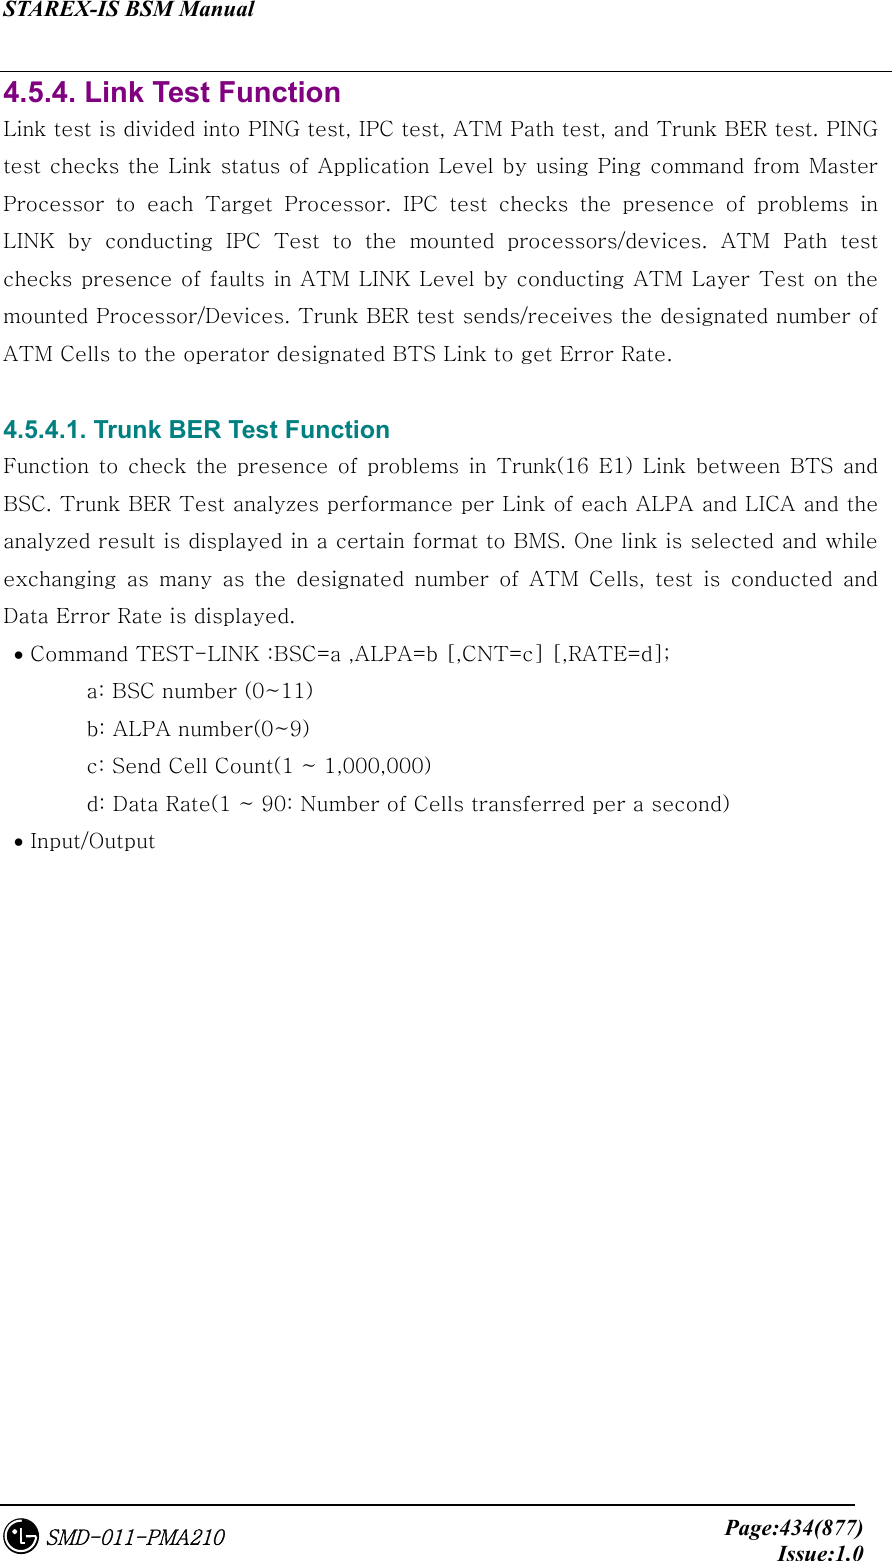 STAREX-IS BSM Manual     Page:434(877)Issue:1.0SMD-011-PMA210 4.5.4. Link Test Function Link test is divided into PING test, IPC test, ATM Path test, and Trunk BER test. PING test checks the Link status of Application Level by using Ping command from Master Processor to each Target Processor. IPC test checks the presence  of  problems  in LINK by conducting IPC Test to the mounted processors/devices. ATM  Path  test checks presence of faults in ATM LINK Level by conducting ATM Layer Test on the mounted Processor/Devices. Trunk BER test sends/receives the designated number of ATM Cells to the operator designated BTS Link to get Error Rate.  4.5.4.1. Trunk BER Test Function Function  to check  the  presence of  problems  in  Trunk(16 E1)  Link  between BTS and BSC. Trunk BER Test analyzes performance per Link of each ALPA and LICA and the analyzed result is displayed in a certain format to BMS. One link is selected and while exchanging  as  many  as  the  designated  number  of  ATM  Cells,  test  is  conducted  and Data Error Rate is displayed.  • Command TEST-LINK :BSC=a ,ALPA=b [,CNT=c] [,RATE=d];   a: BSC number (0~11)   b: ALPA number(0~9)   c: Send Cell Count(1 ~ 1,000,000)   d: Data Rate(1 ~ 90: Number of Cells transferred per a second)  • Input/Output 